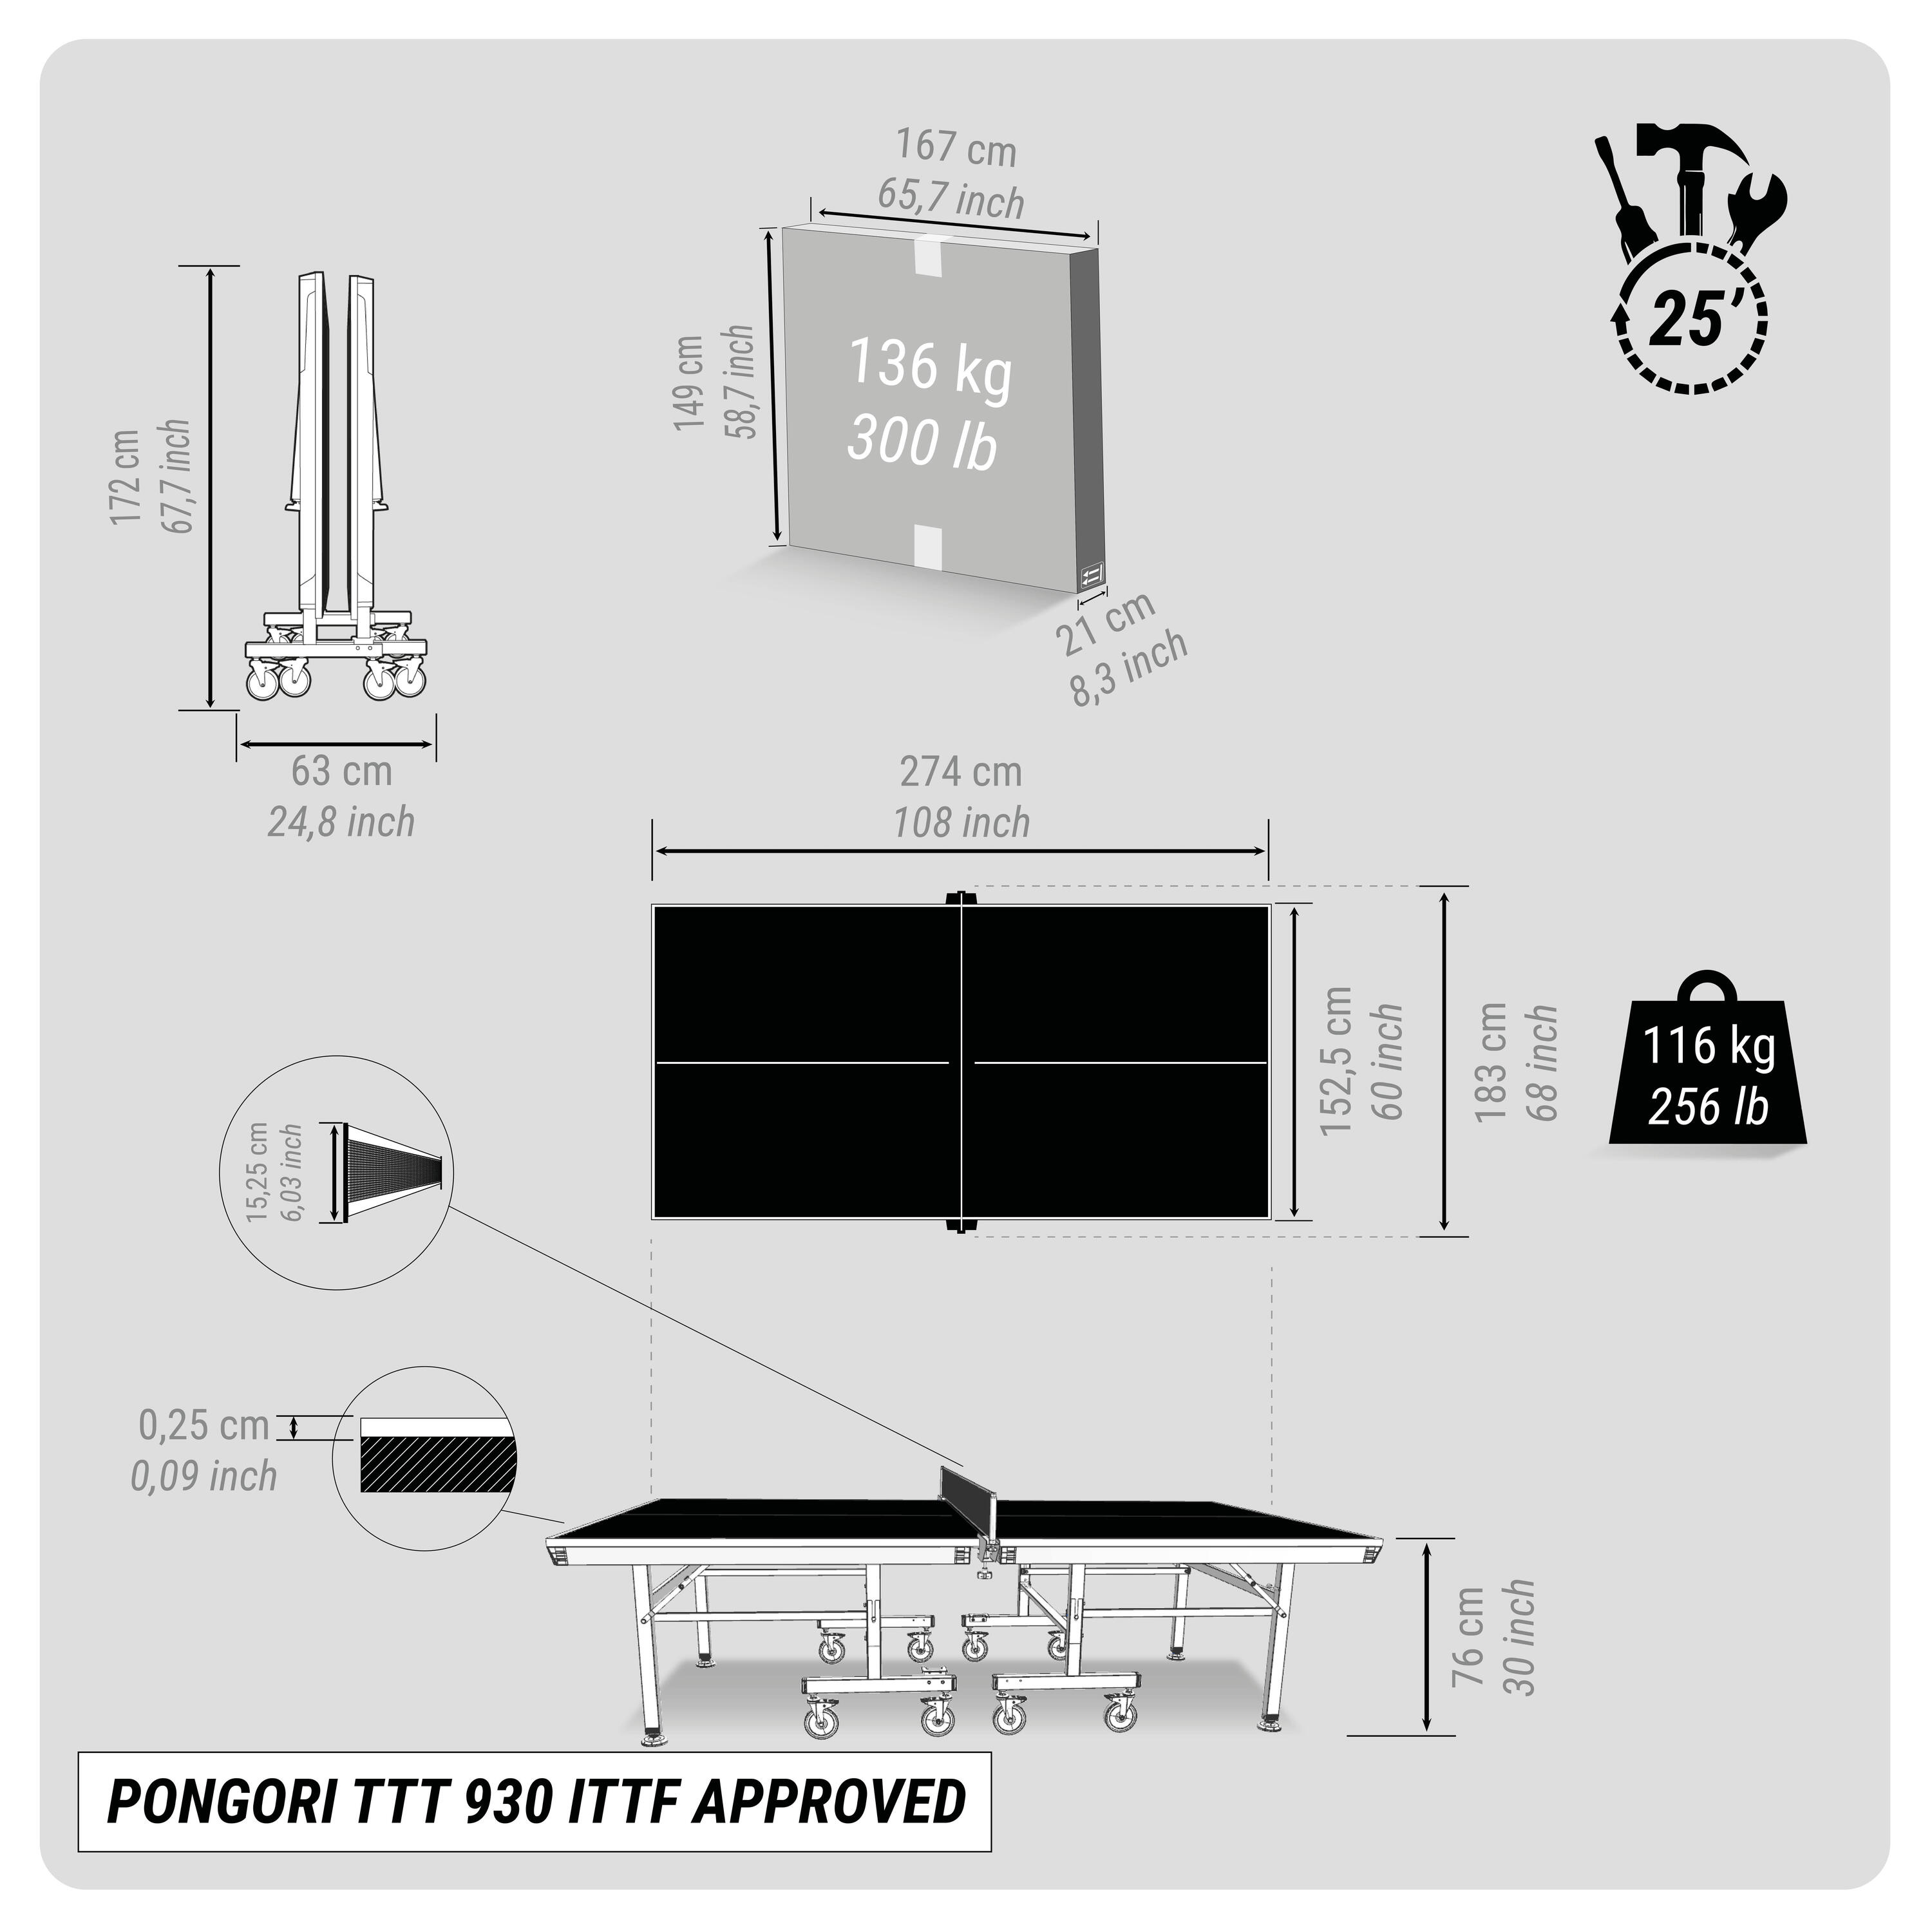 ITTF-Approved Club Table Tennis Table TTT 930 with Black Tabletops 14/15